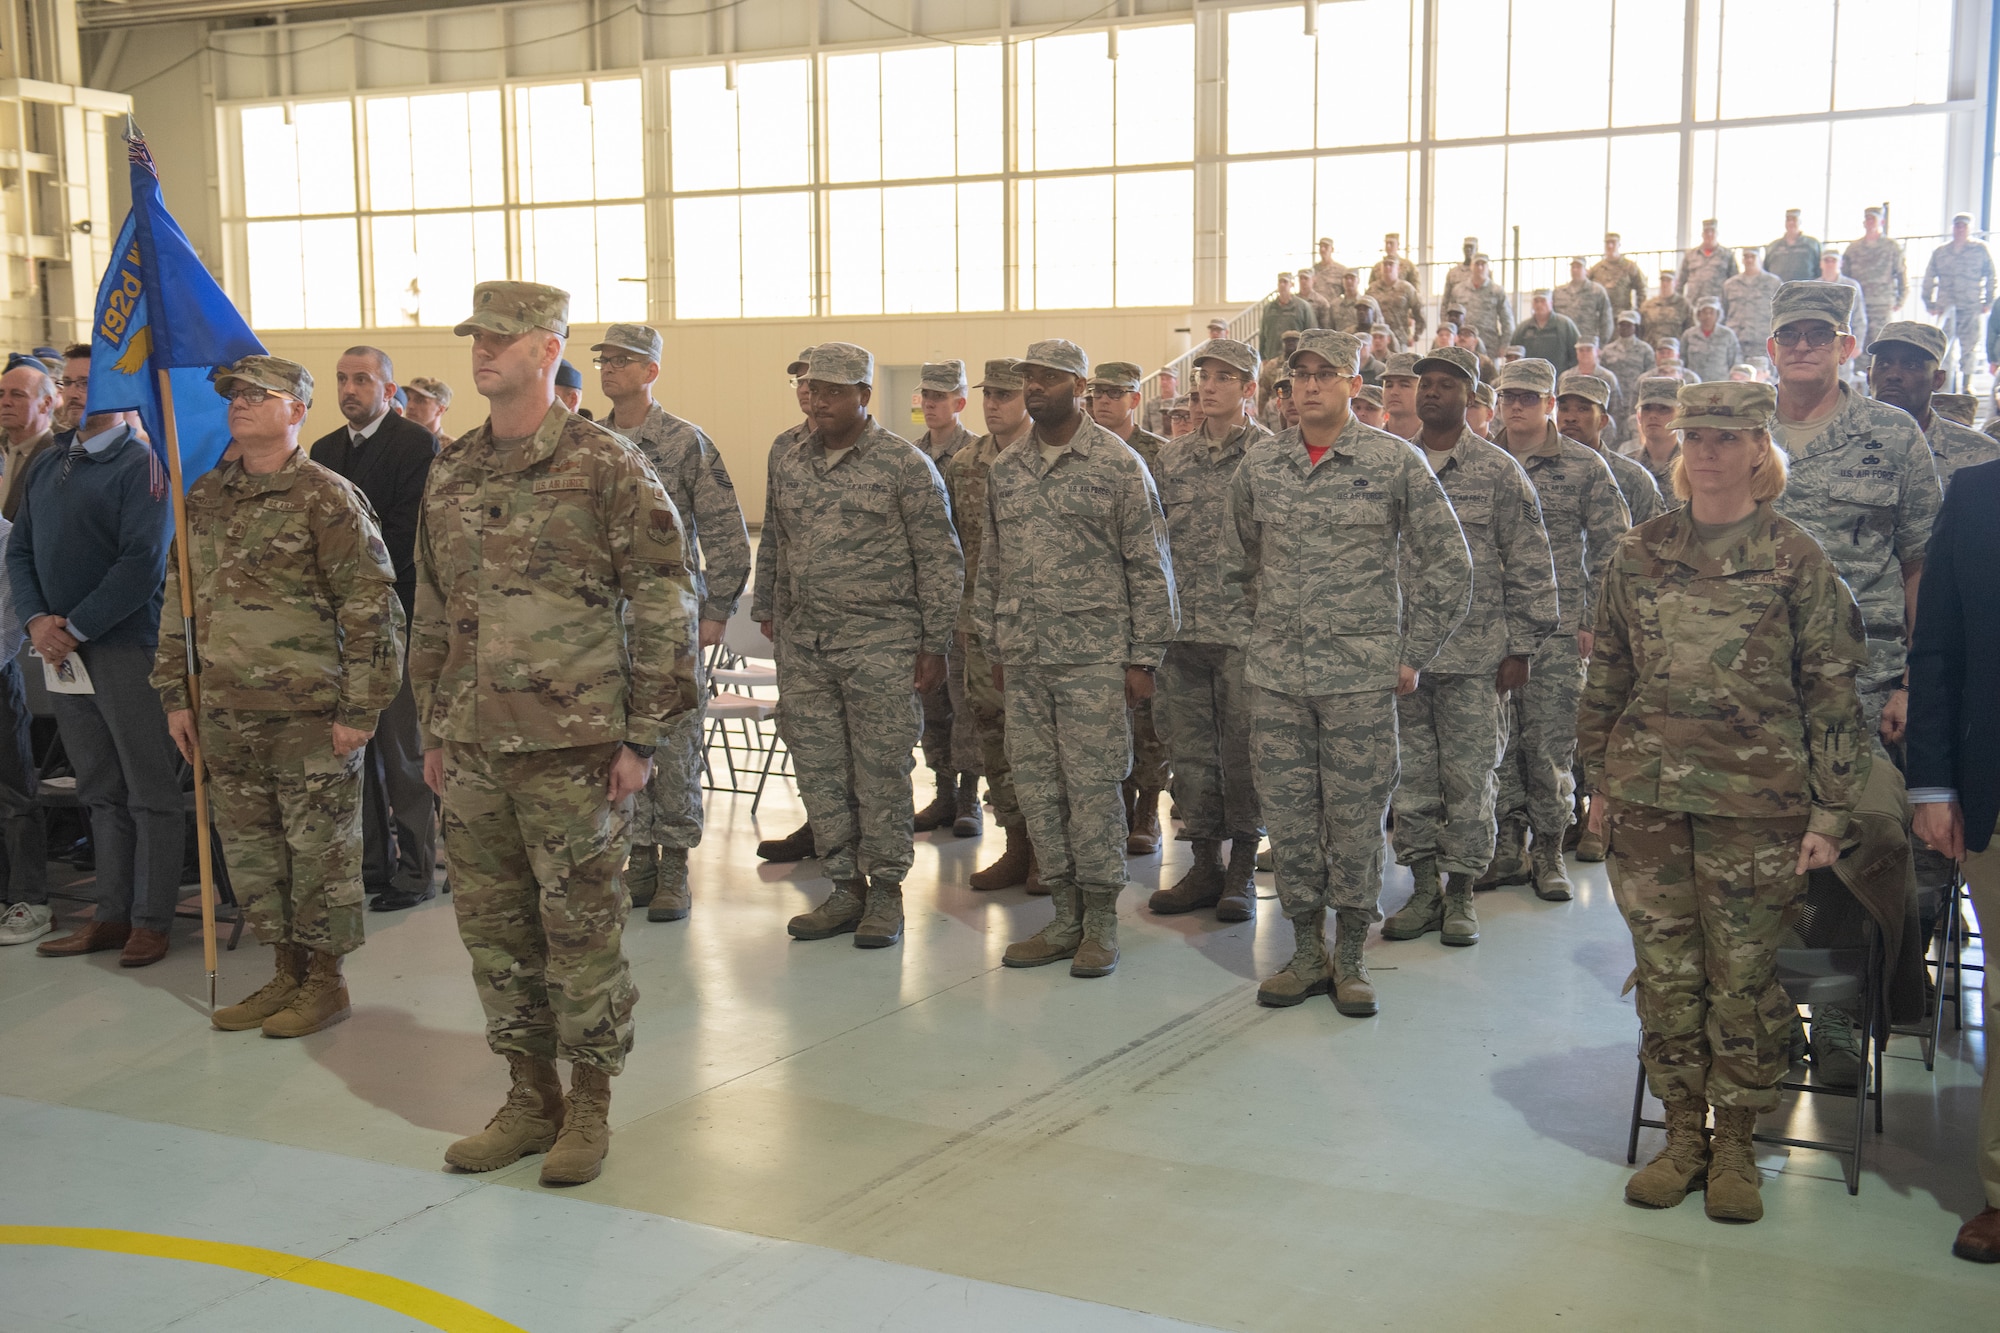 Attendees at a command ceremony